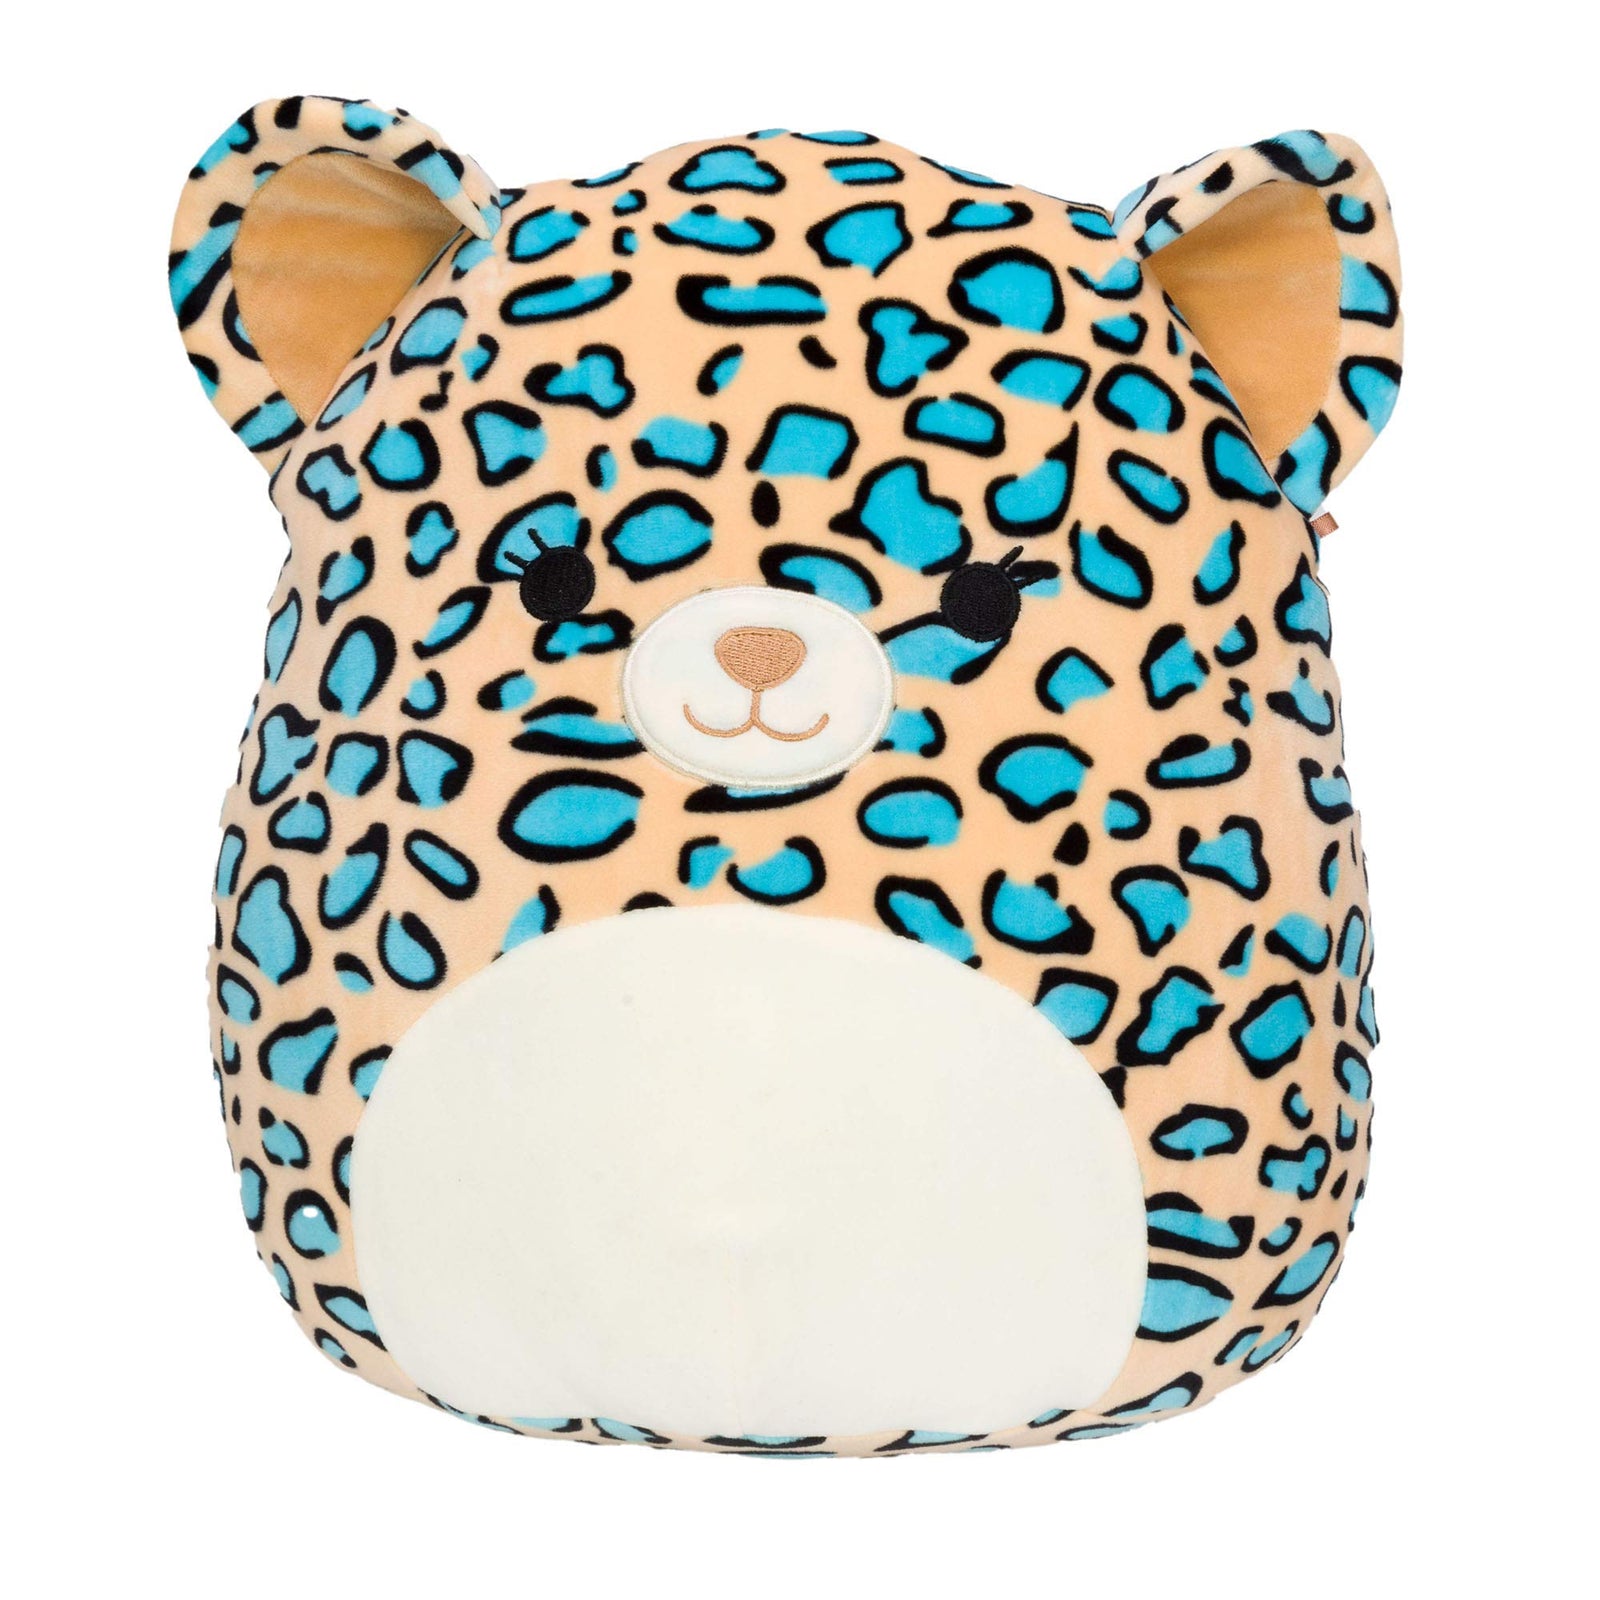 Squishmallow Official Kellytoy Plush 16" Liv The Teal Leopard - Ultrasoft Stuffed Animal Plush Toy